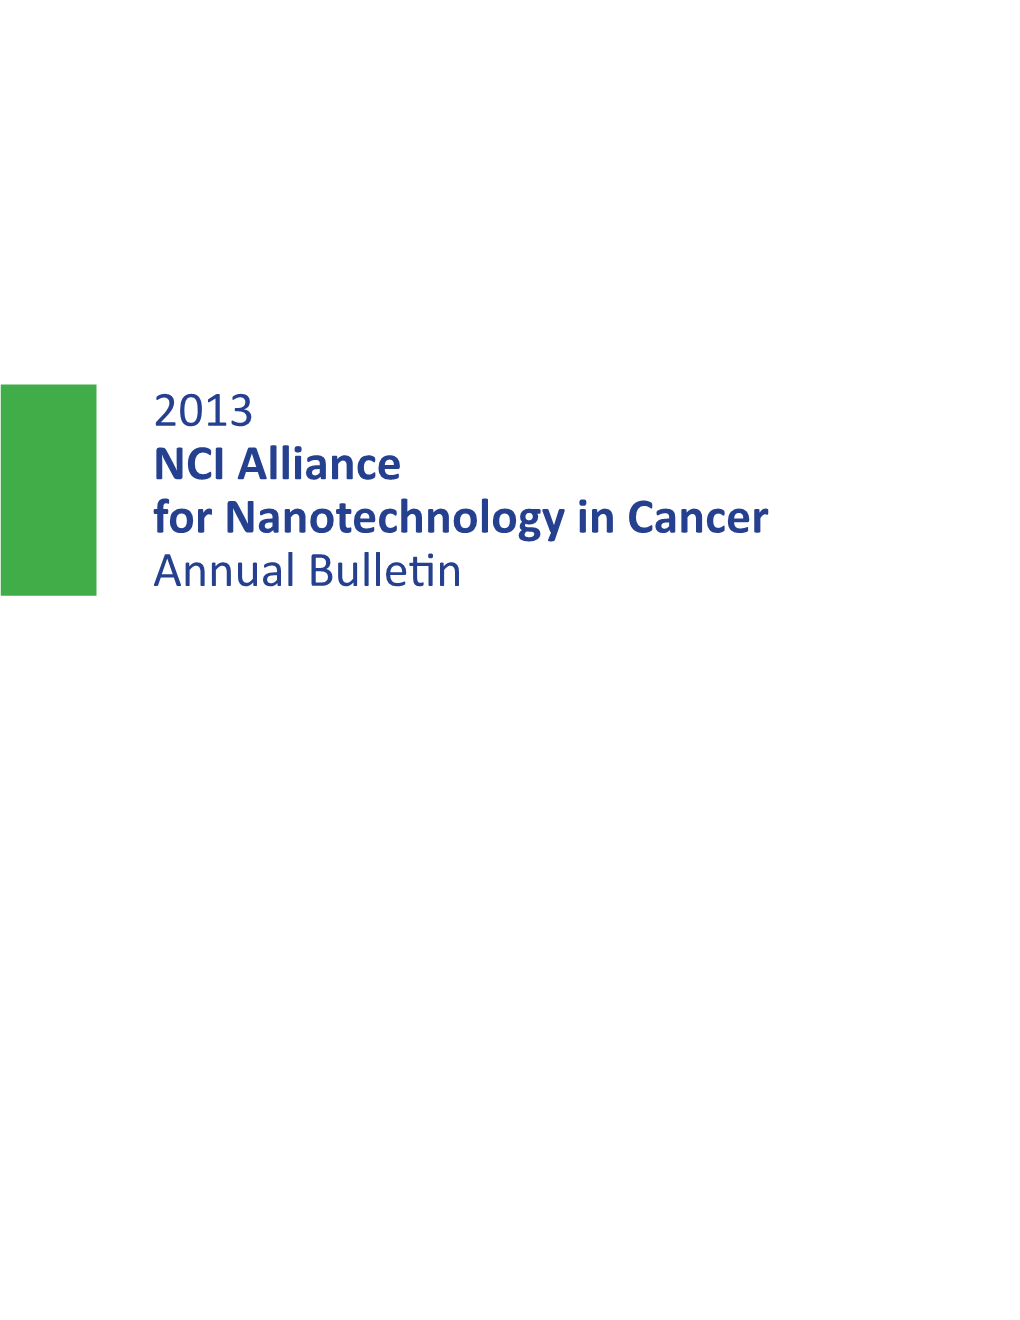 2013 NCI Alliance for Nanotechnology in Cancer Annual Bulletin EDITOR-IN-CHIEF